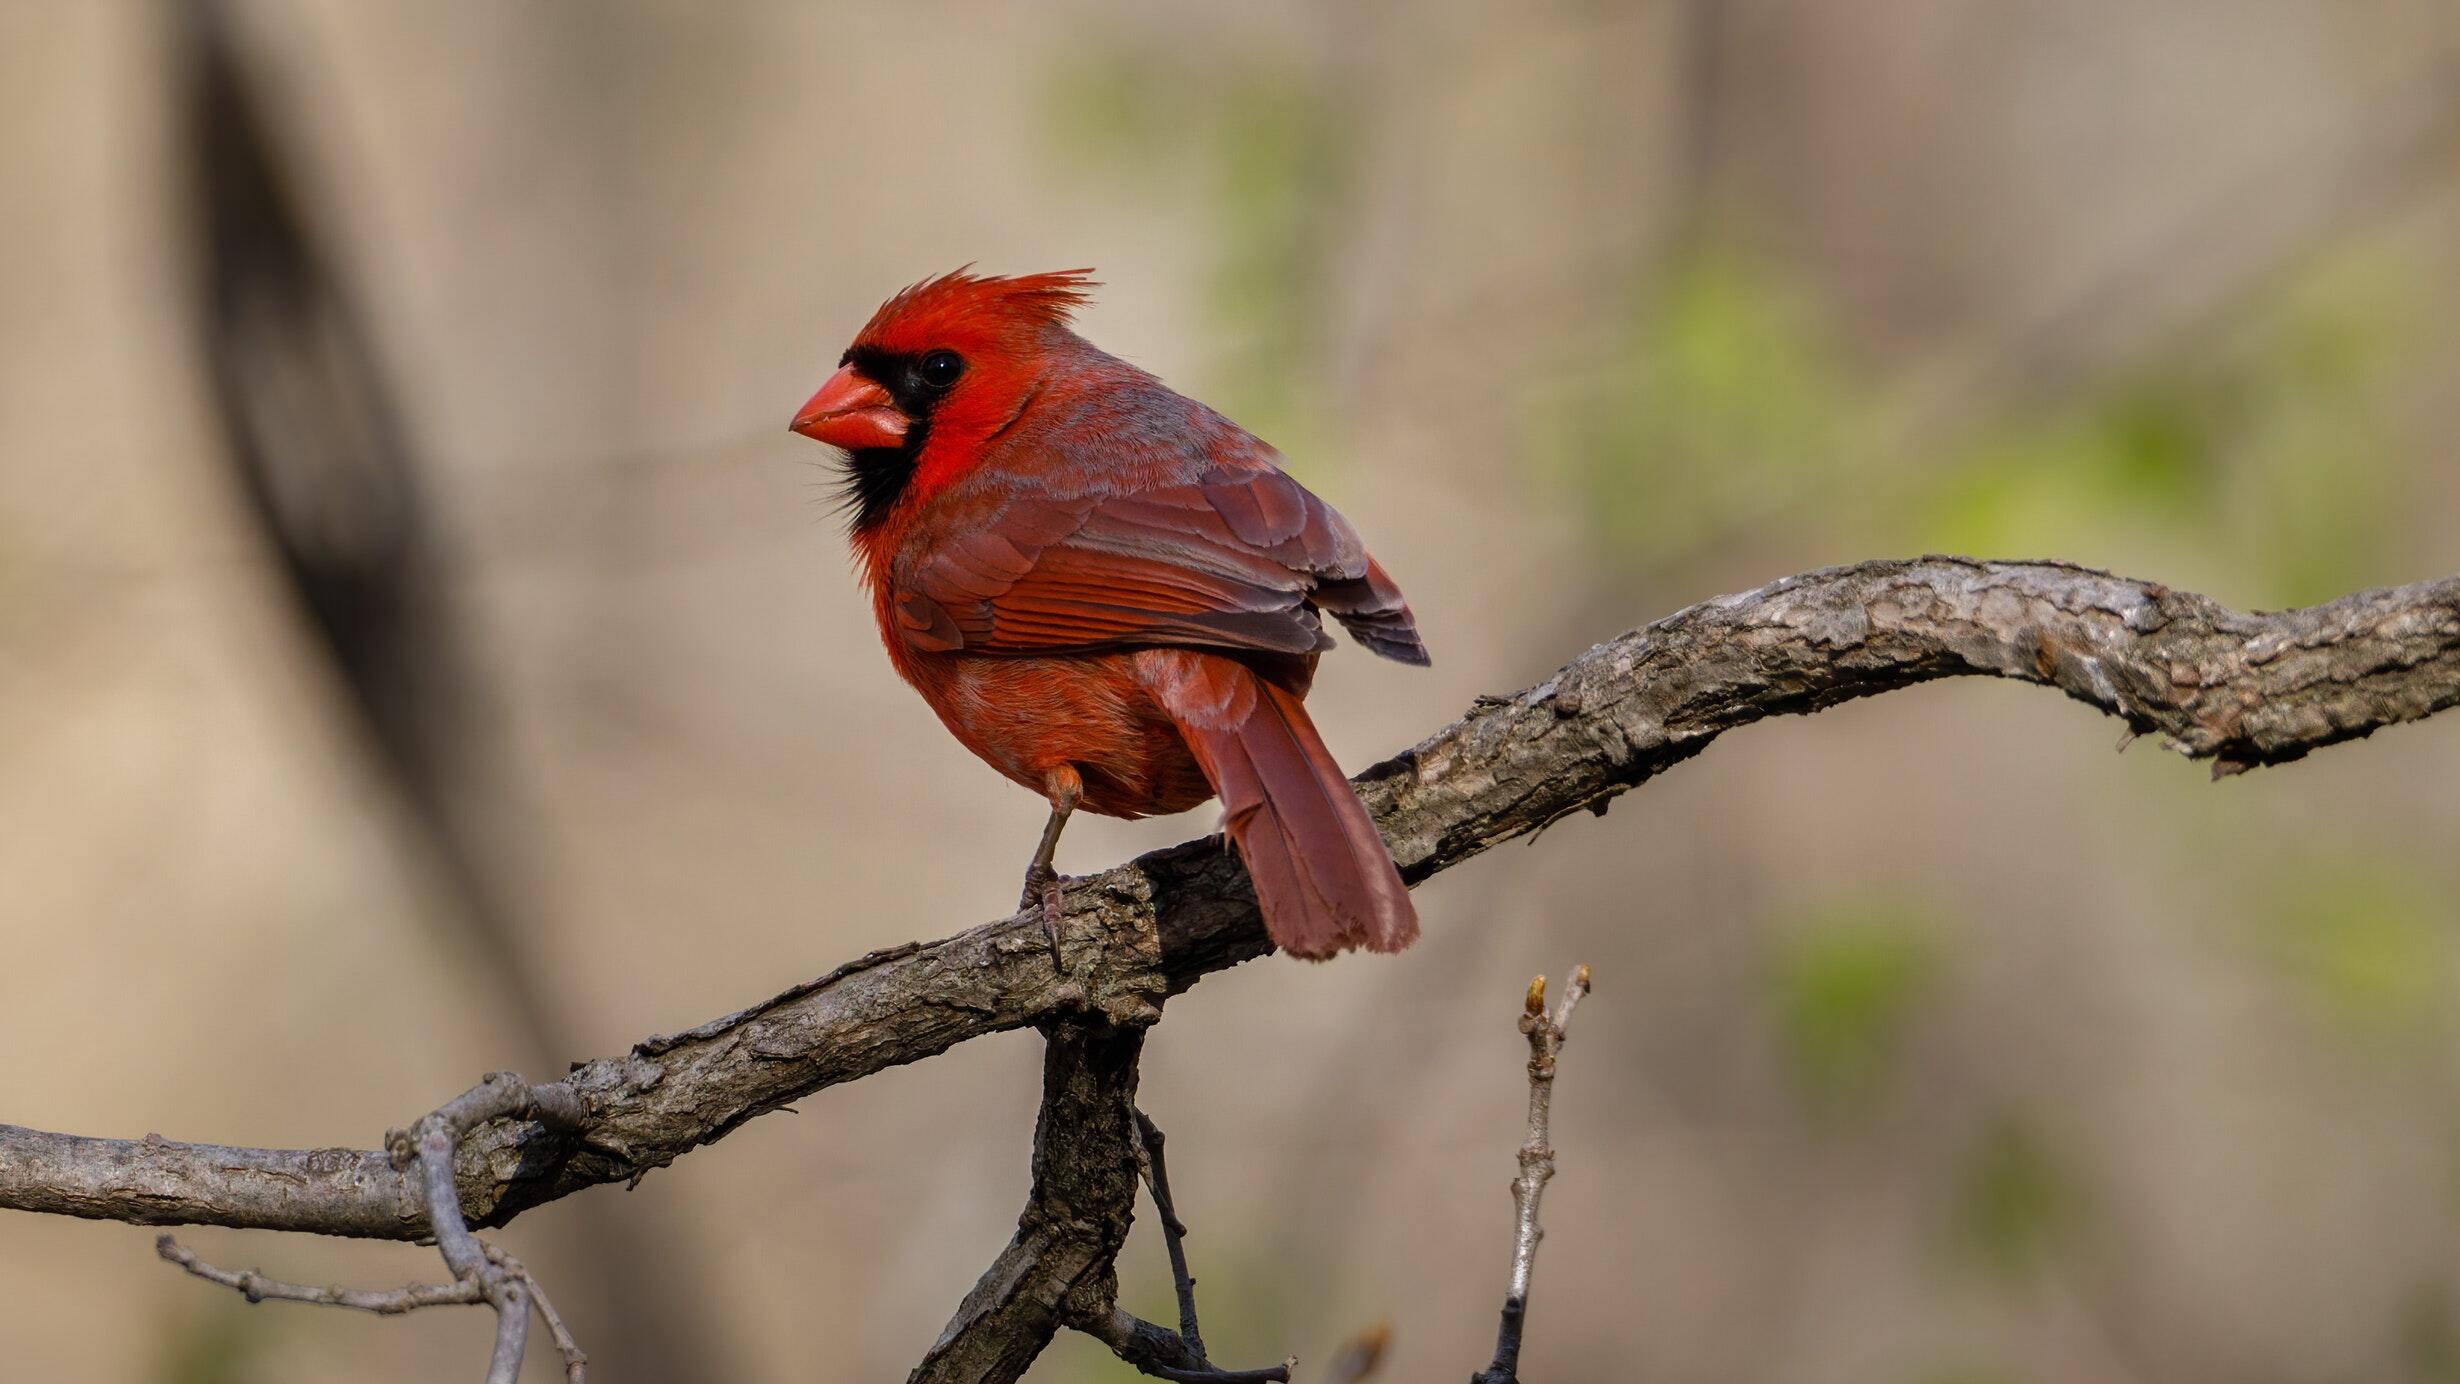 A bright red northern cardinal perched on a tree branch.